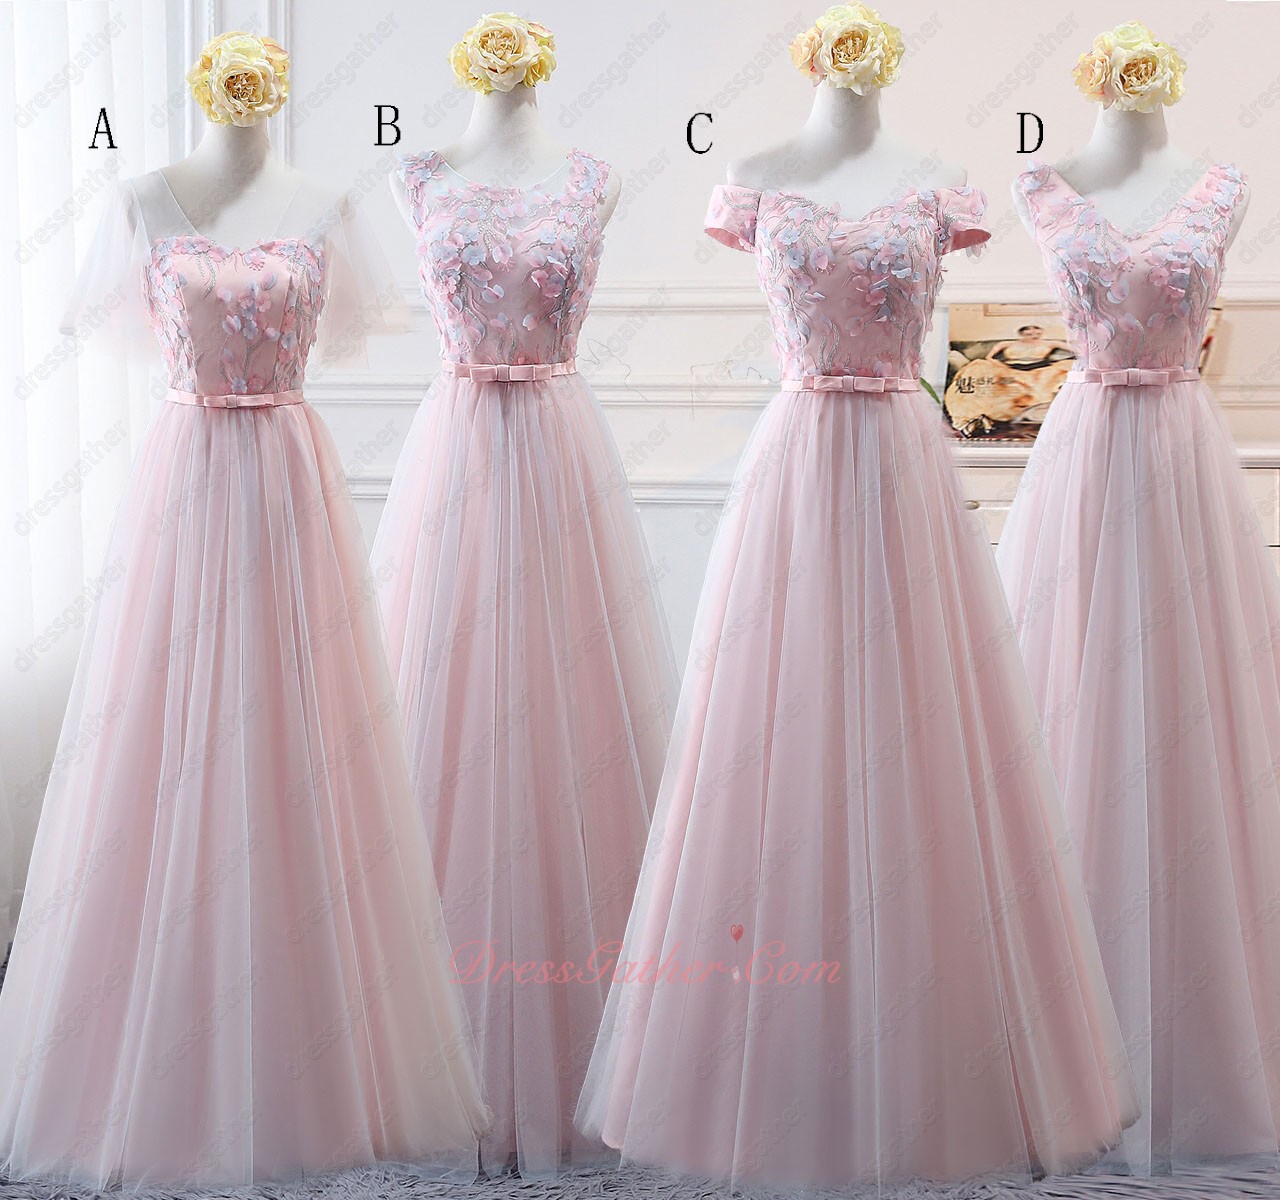 Baby Pink and Baby Blue Flowers Bodice Bridesmaids Dress Series Sale - Click Image to Close